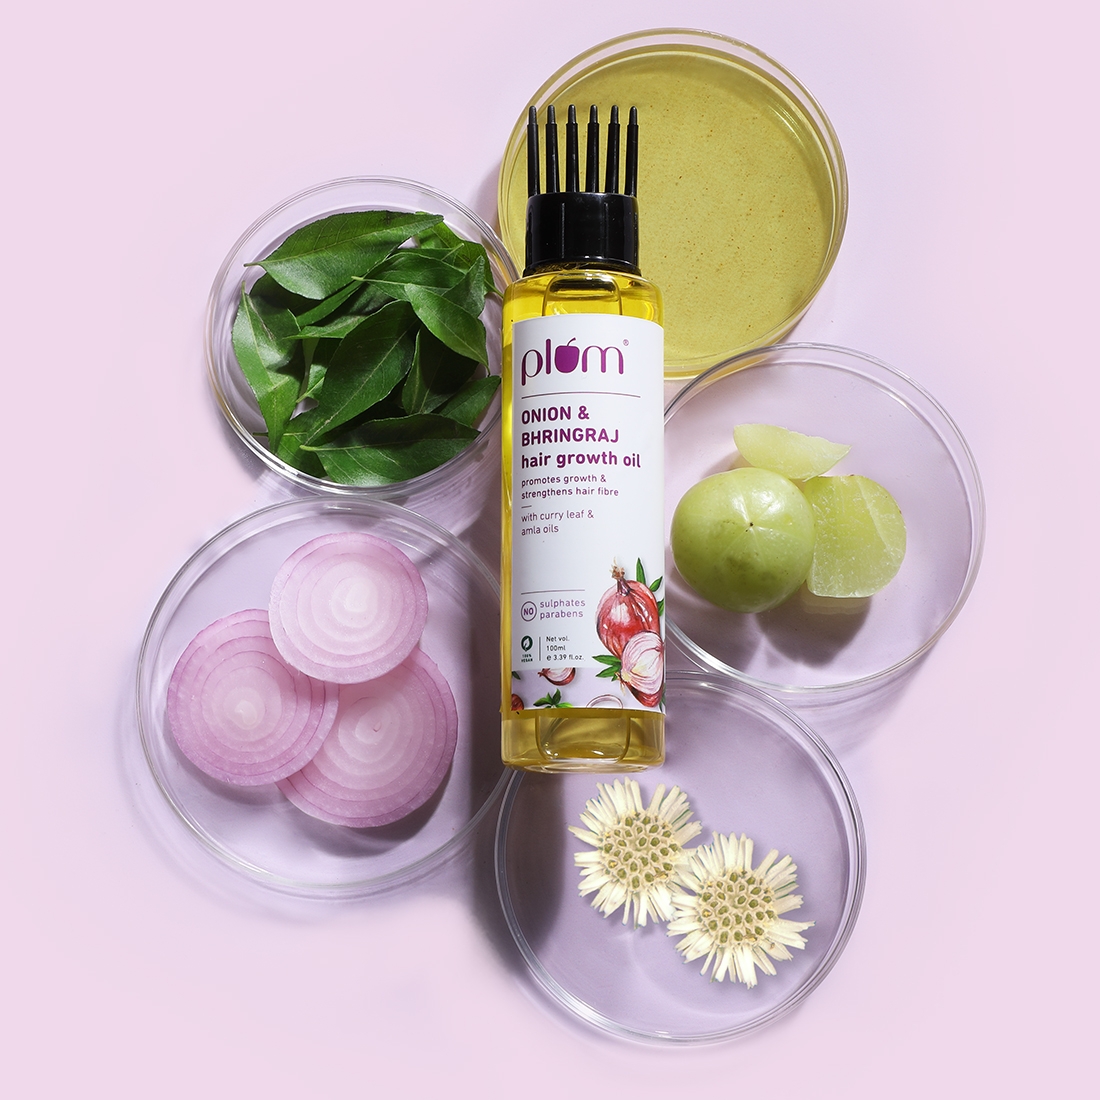 Plum Onion and Bhringraj Hair Growth Oil with Curry Leaf and Amla Oils | For All Hair Types| Sulphate-Free | Paraben-Free | 100% Vegan | Promotes Growth, Strengthens Hair Fibre